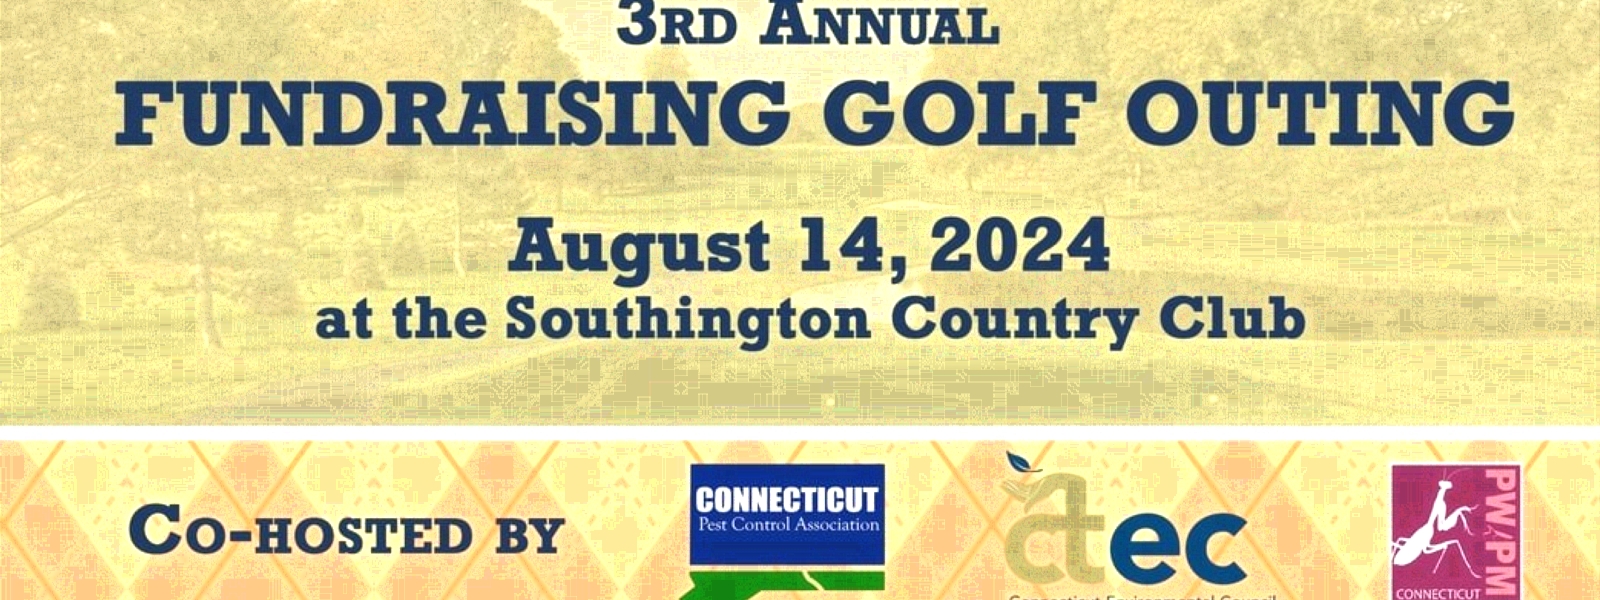 3rd Annual Fundraising Golf Outing